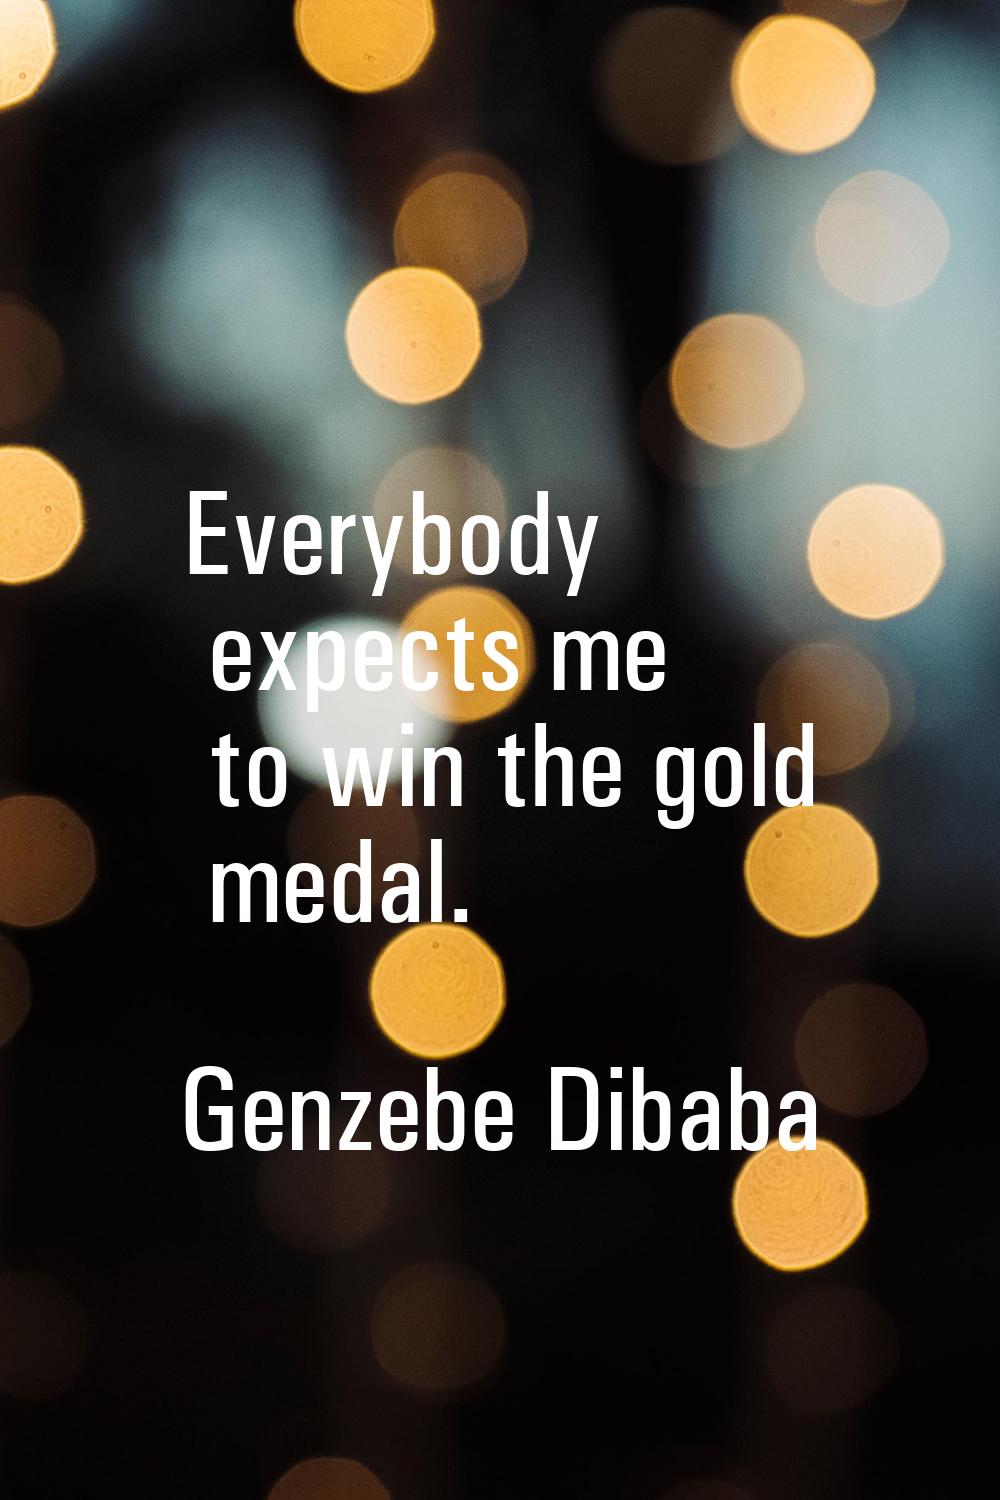 Everybody expects me to win the gold medal.